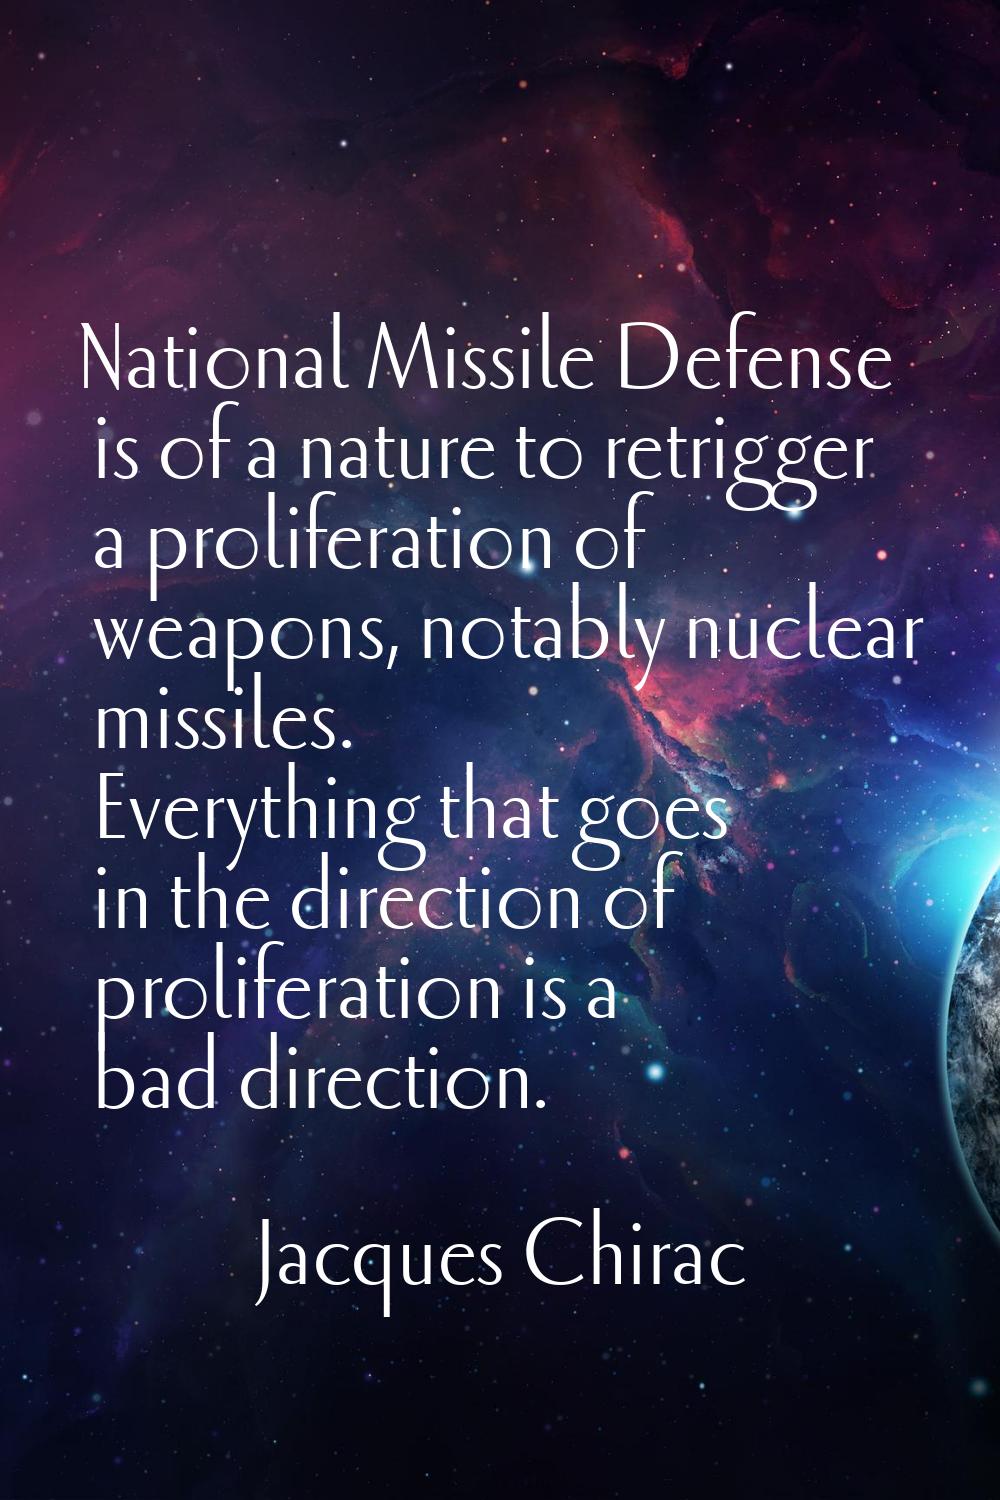 National Missile Defense is of a nature to retrigger a proliferation of weapons, notably nuclear mi